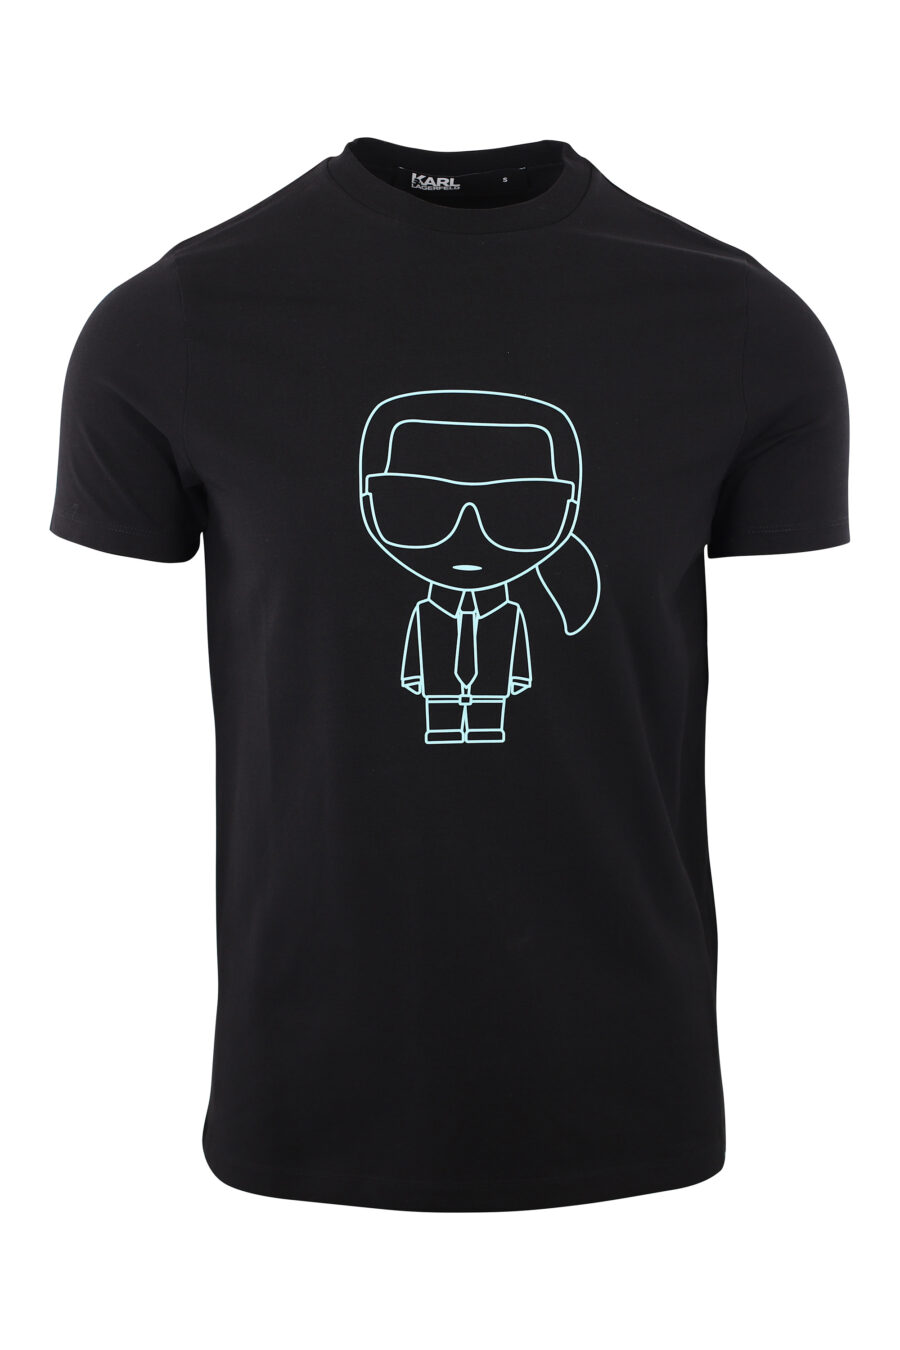 Black T-shirt with logo in mint green silhouette - IMG 1996